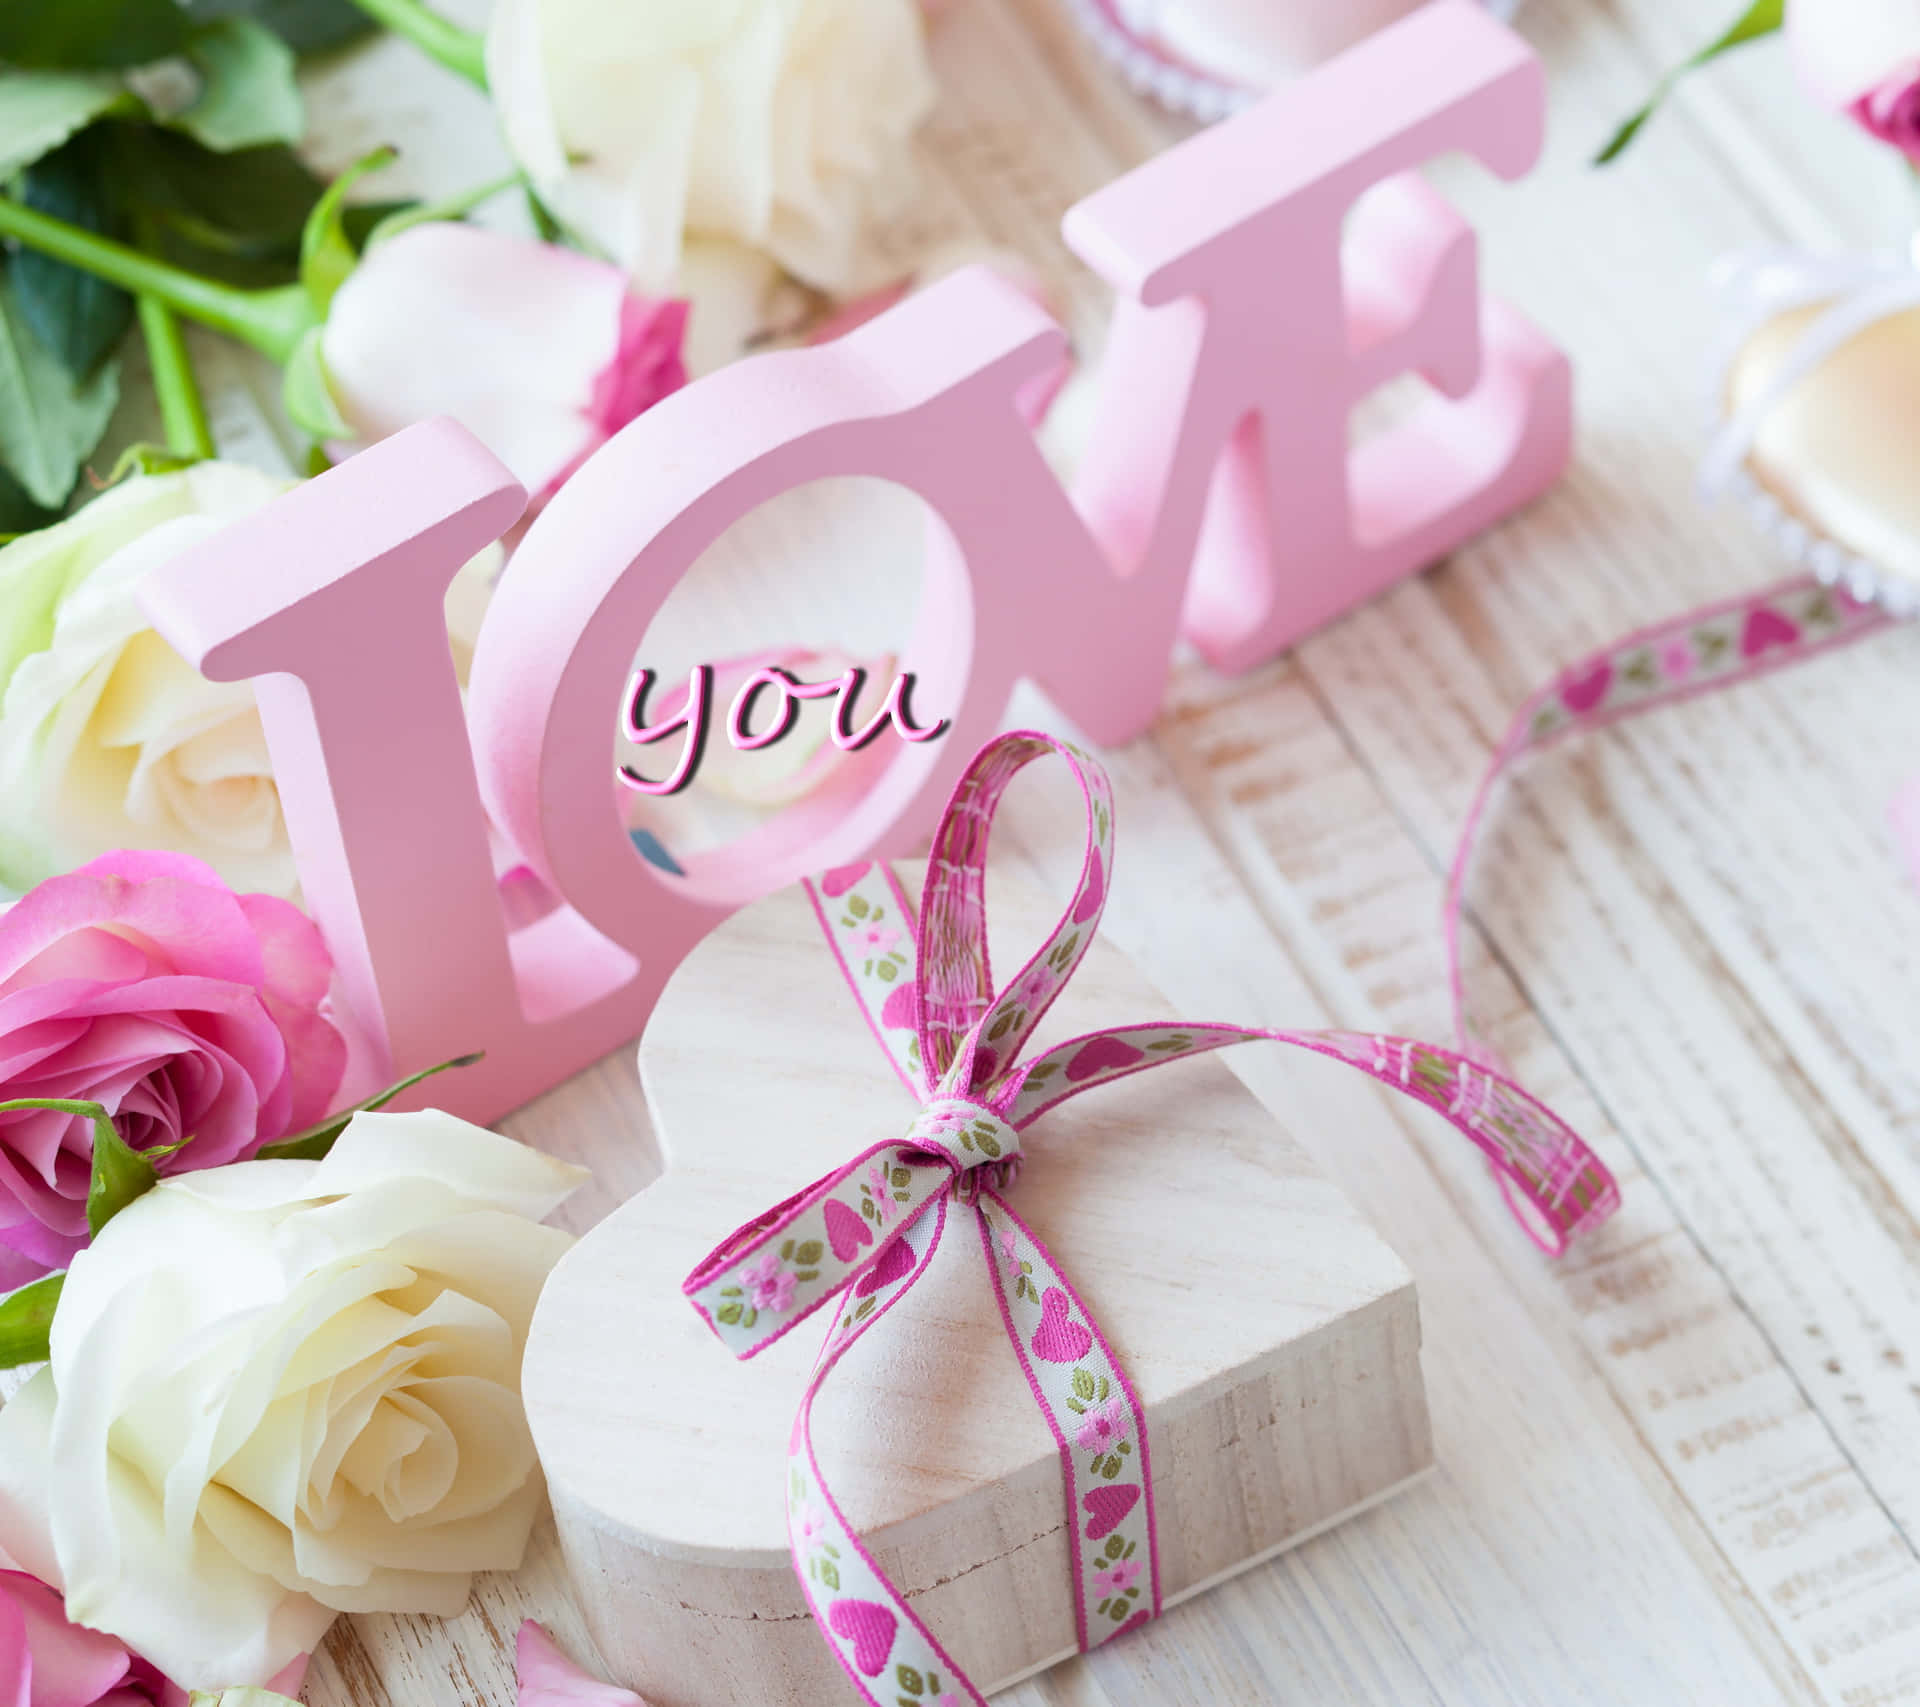 A Pink And White Heart Shaped Box With A Pink Ribbon